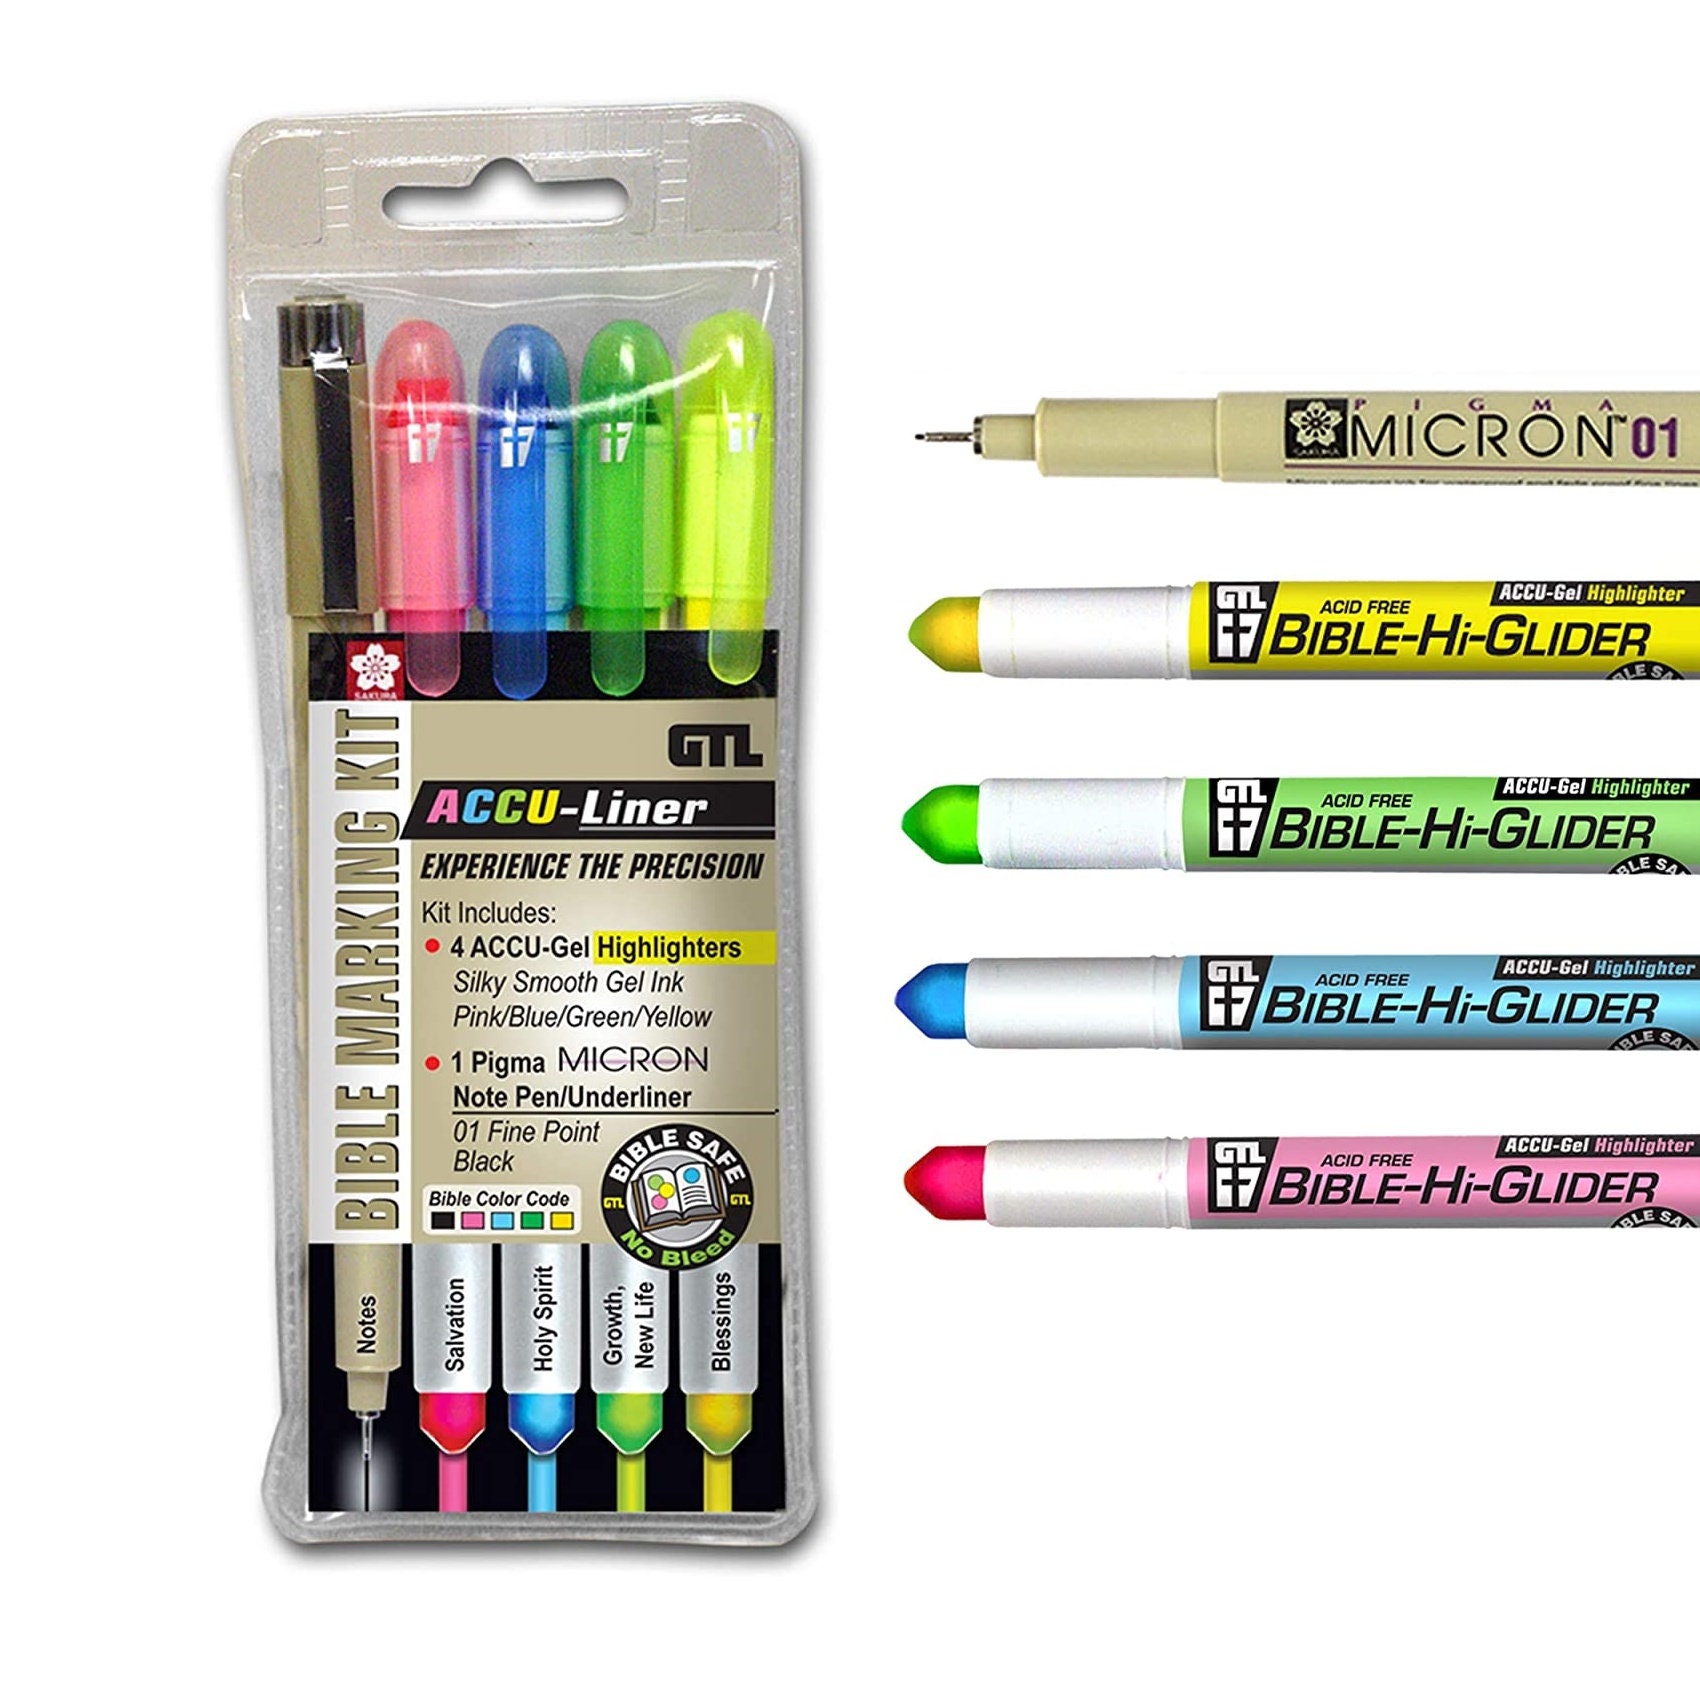 Bible Dry Highlighter Refills (2) Yellow Carded